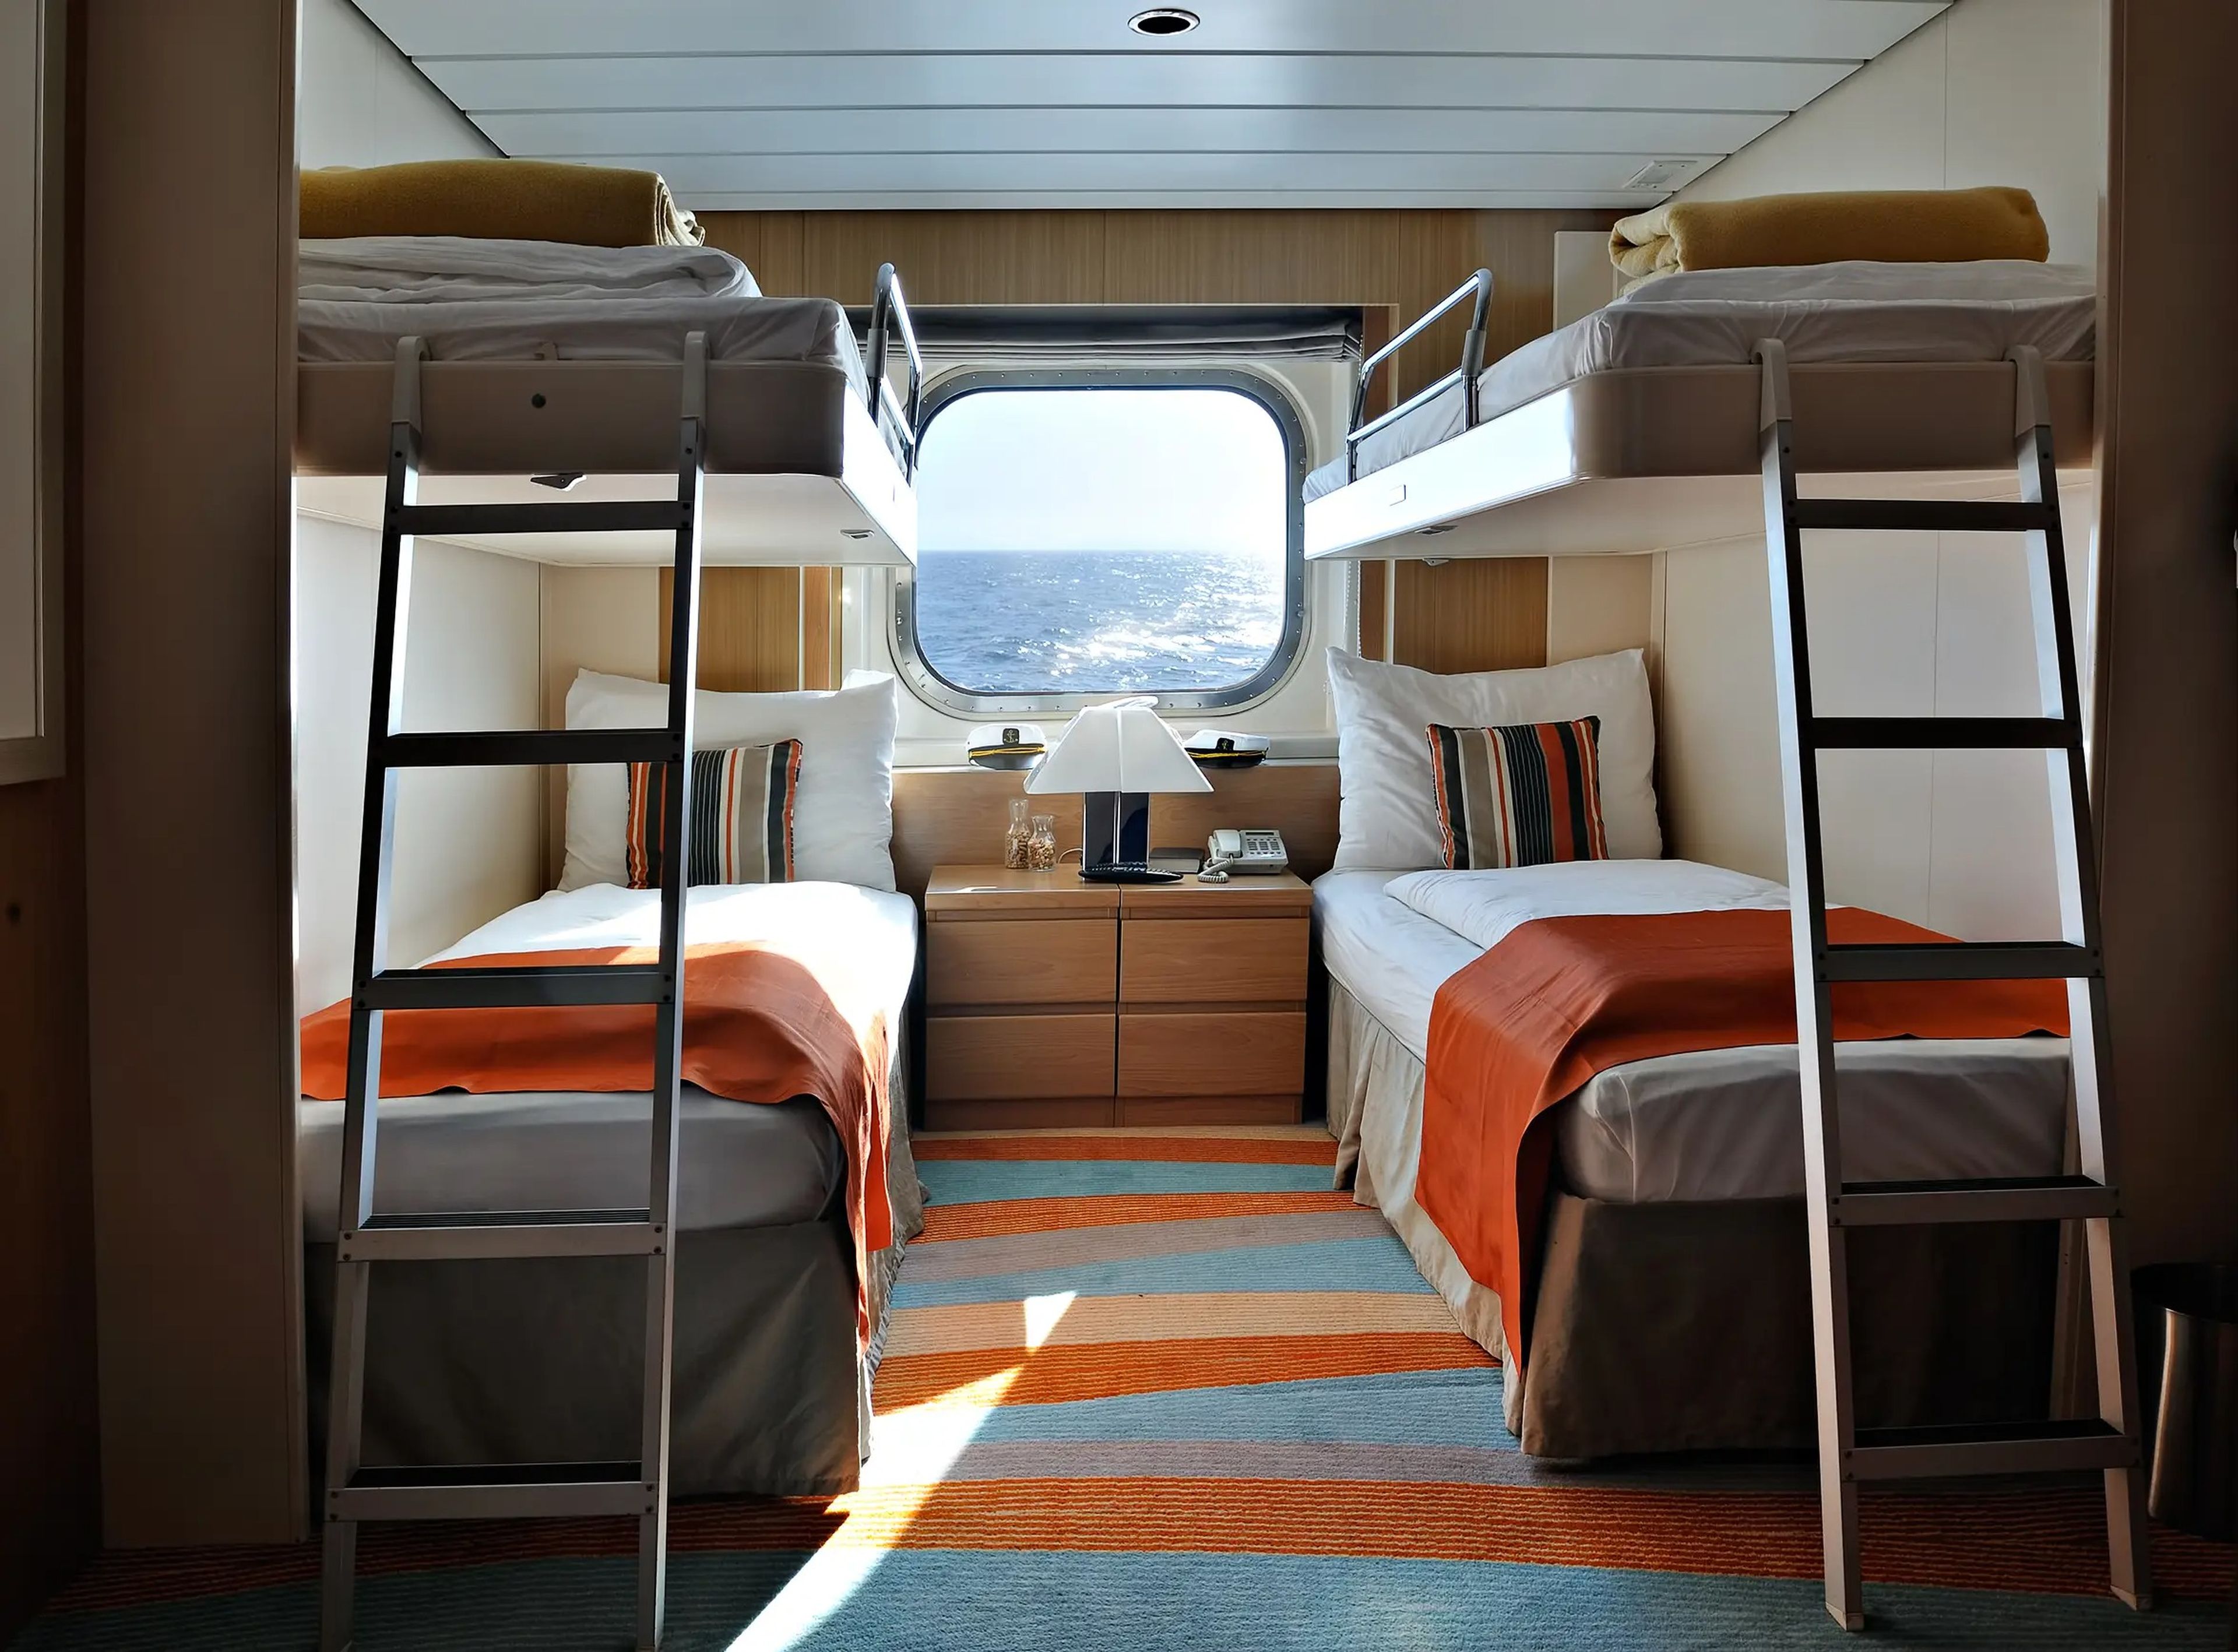 bunk beds in a cruise ship cabin with window